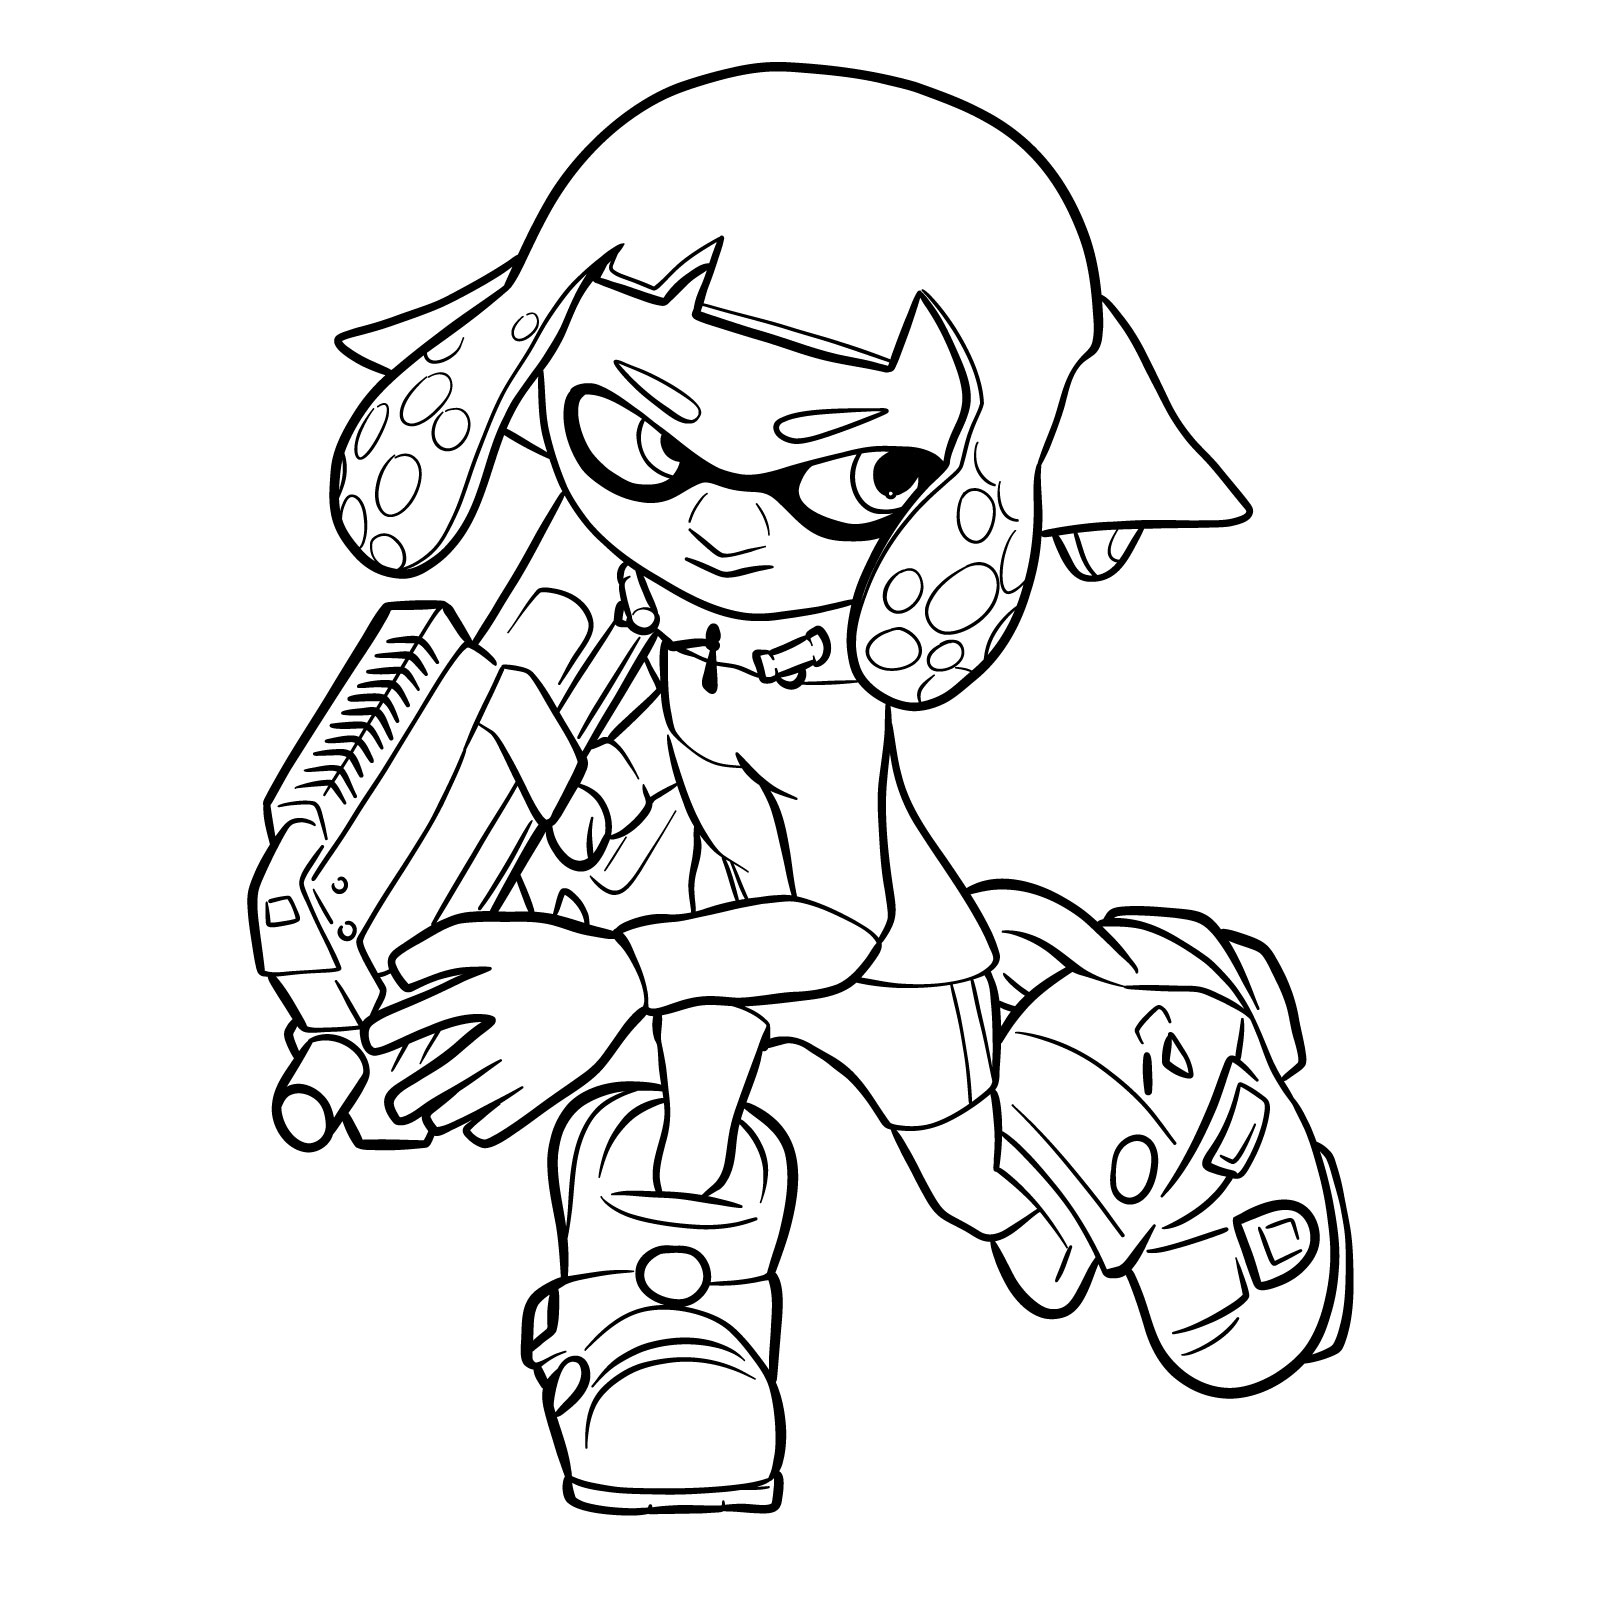 How to draw a Splatoon Agent 4 - final step